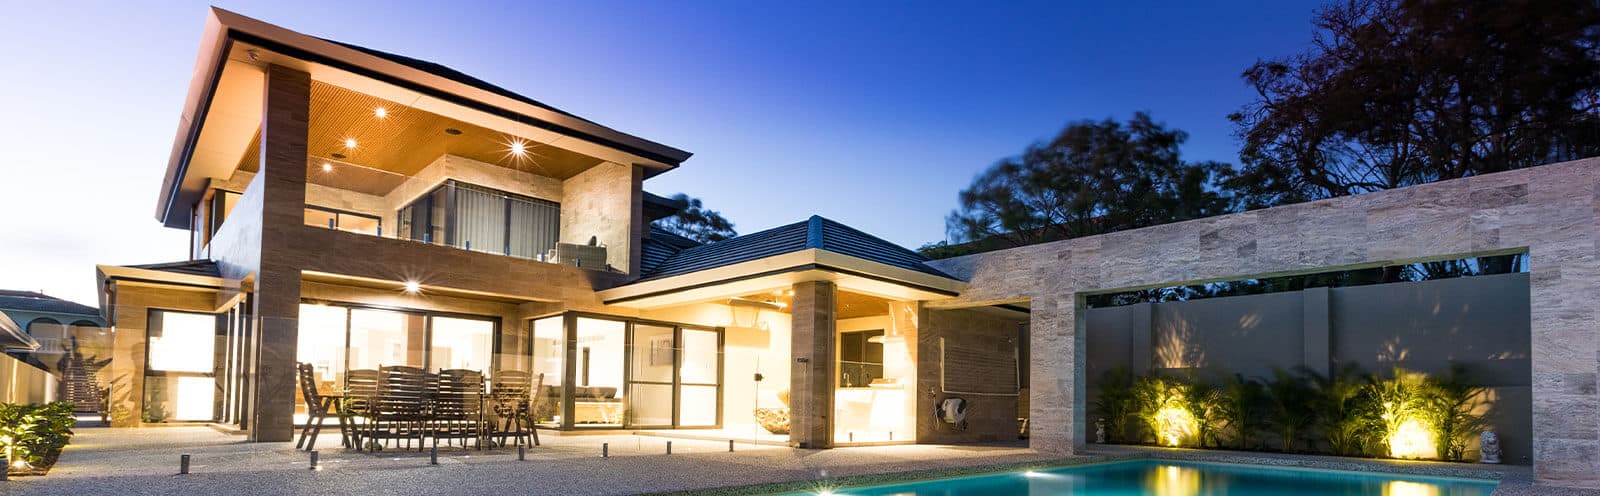 Good boutique builders in Perth